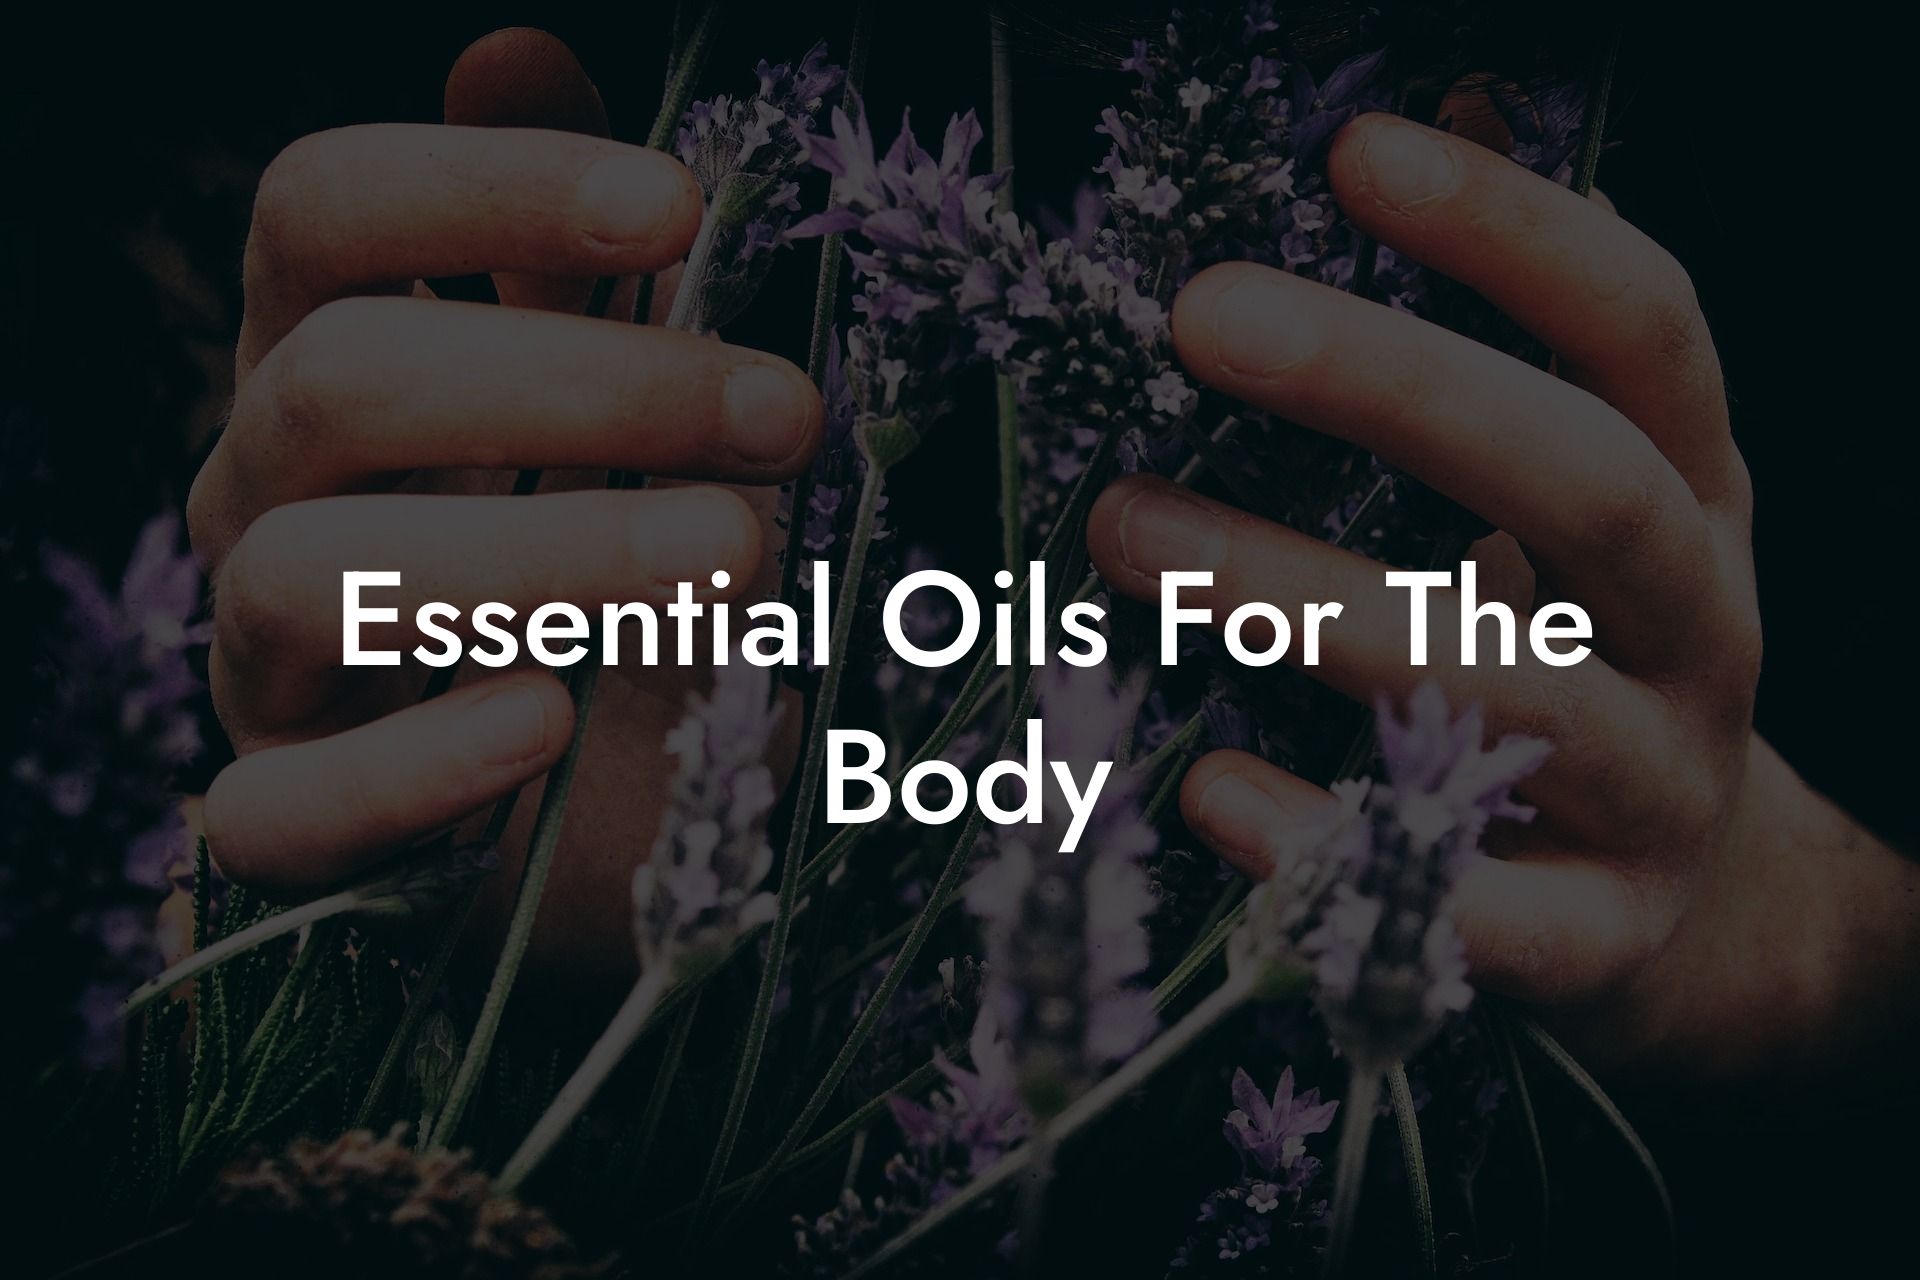 Essential Oils For The Body